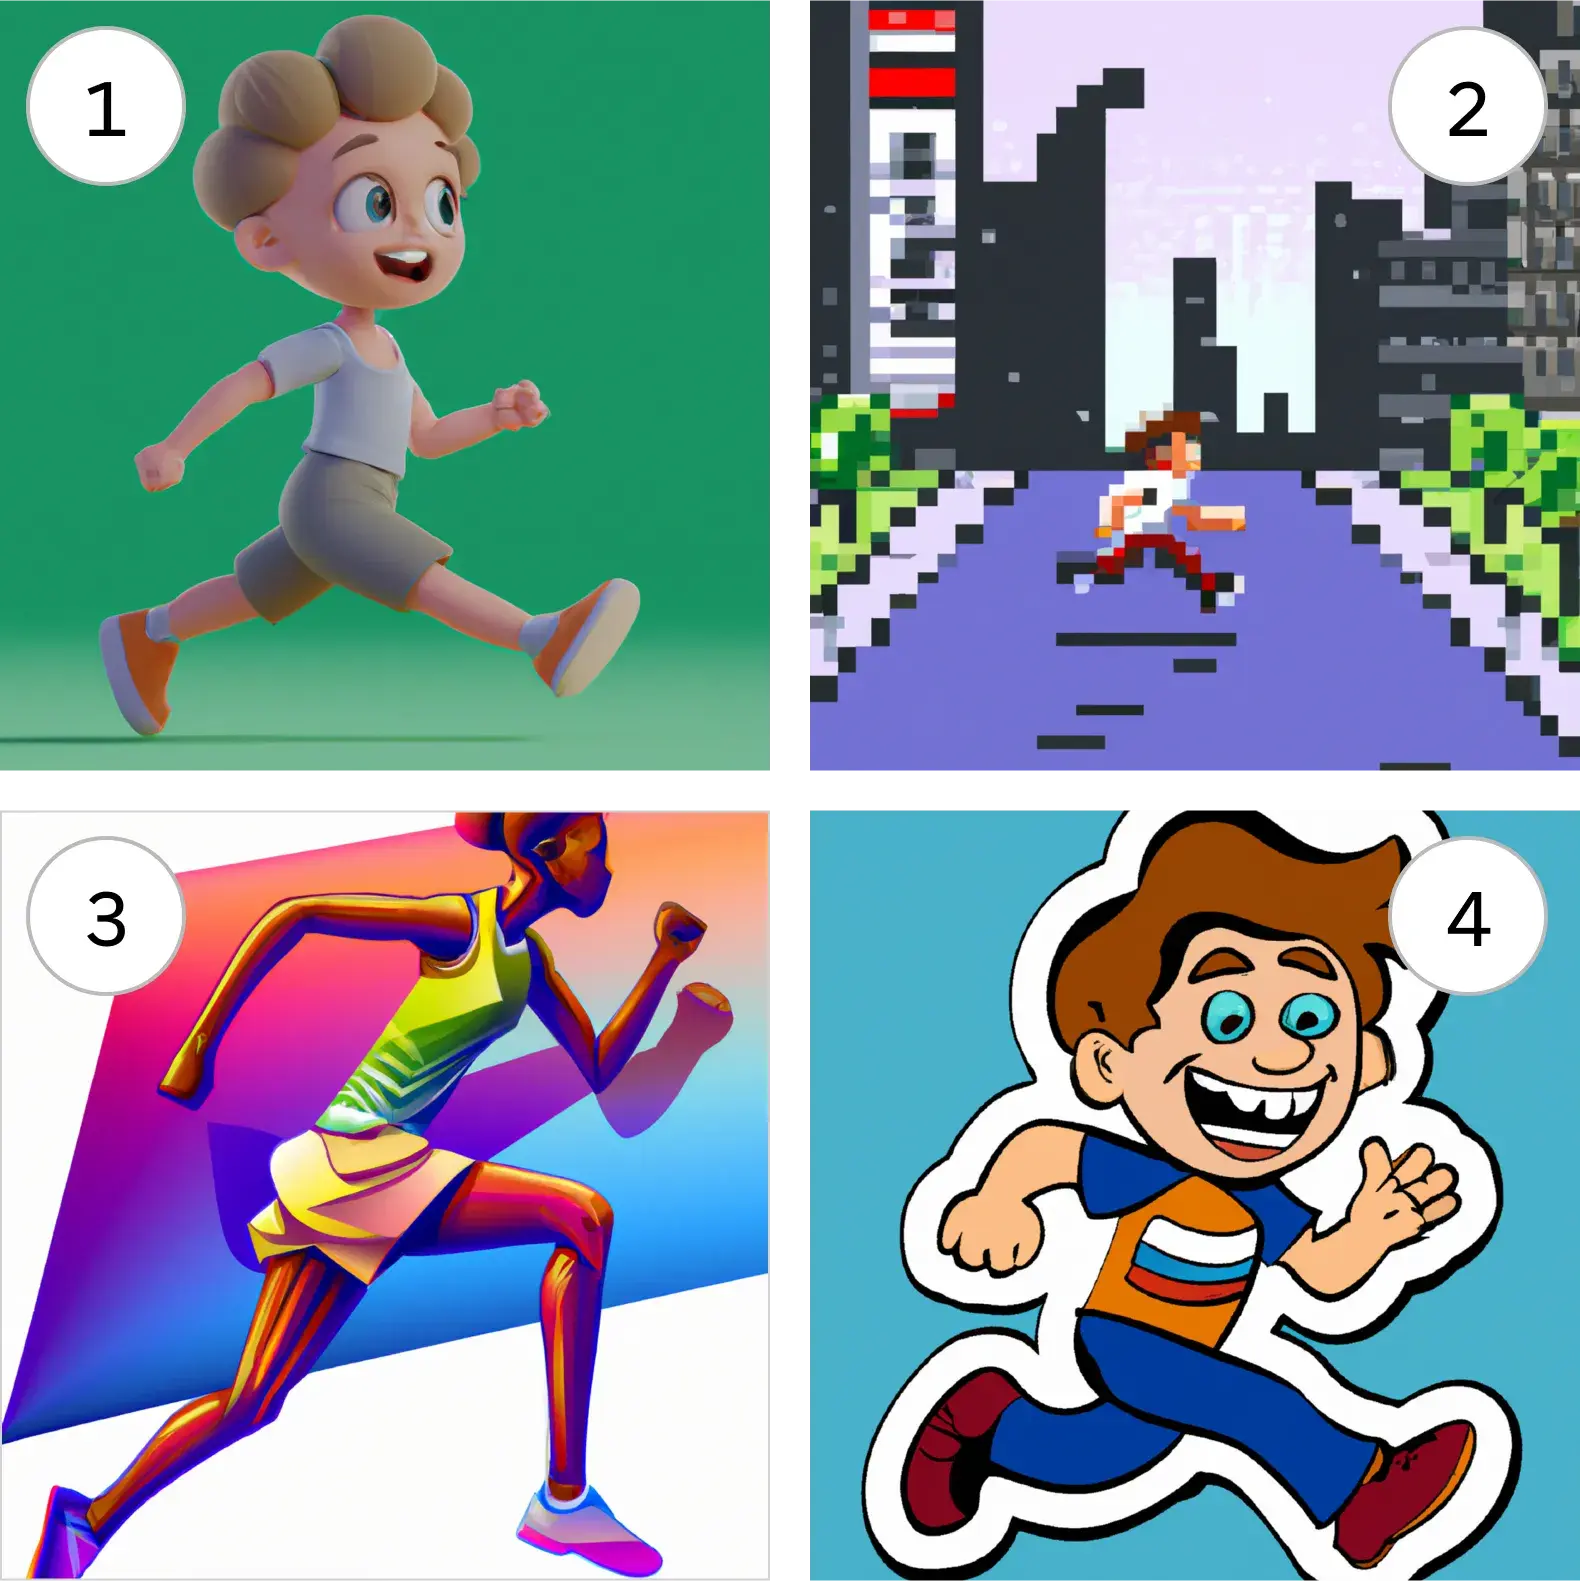 Four different images of people running, rendered in different digital styles.